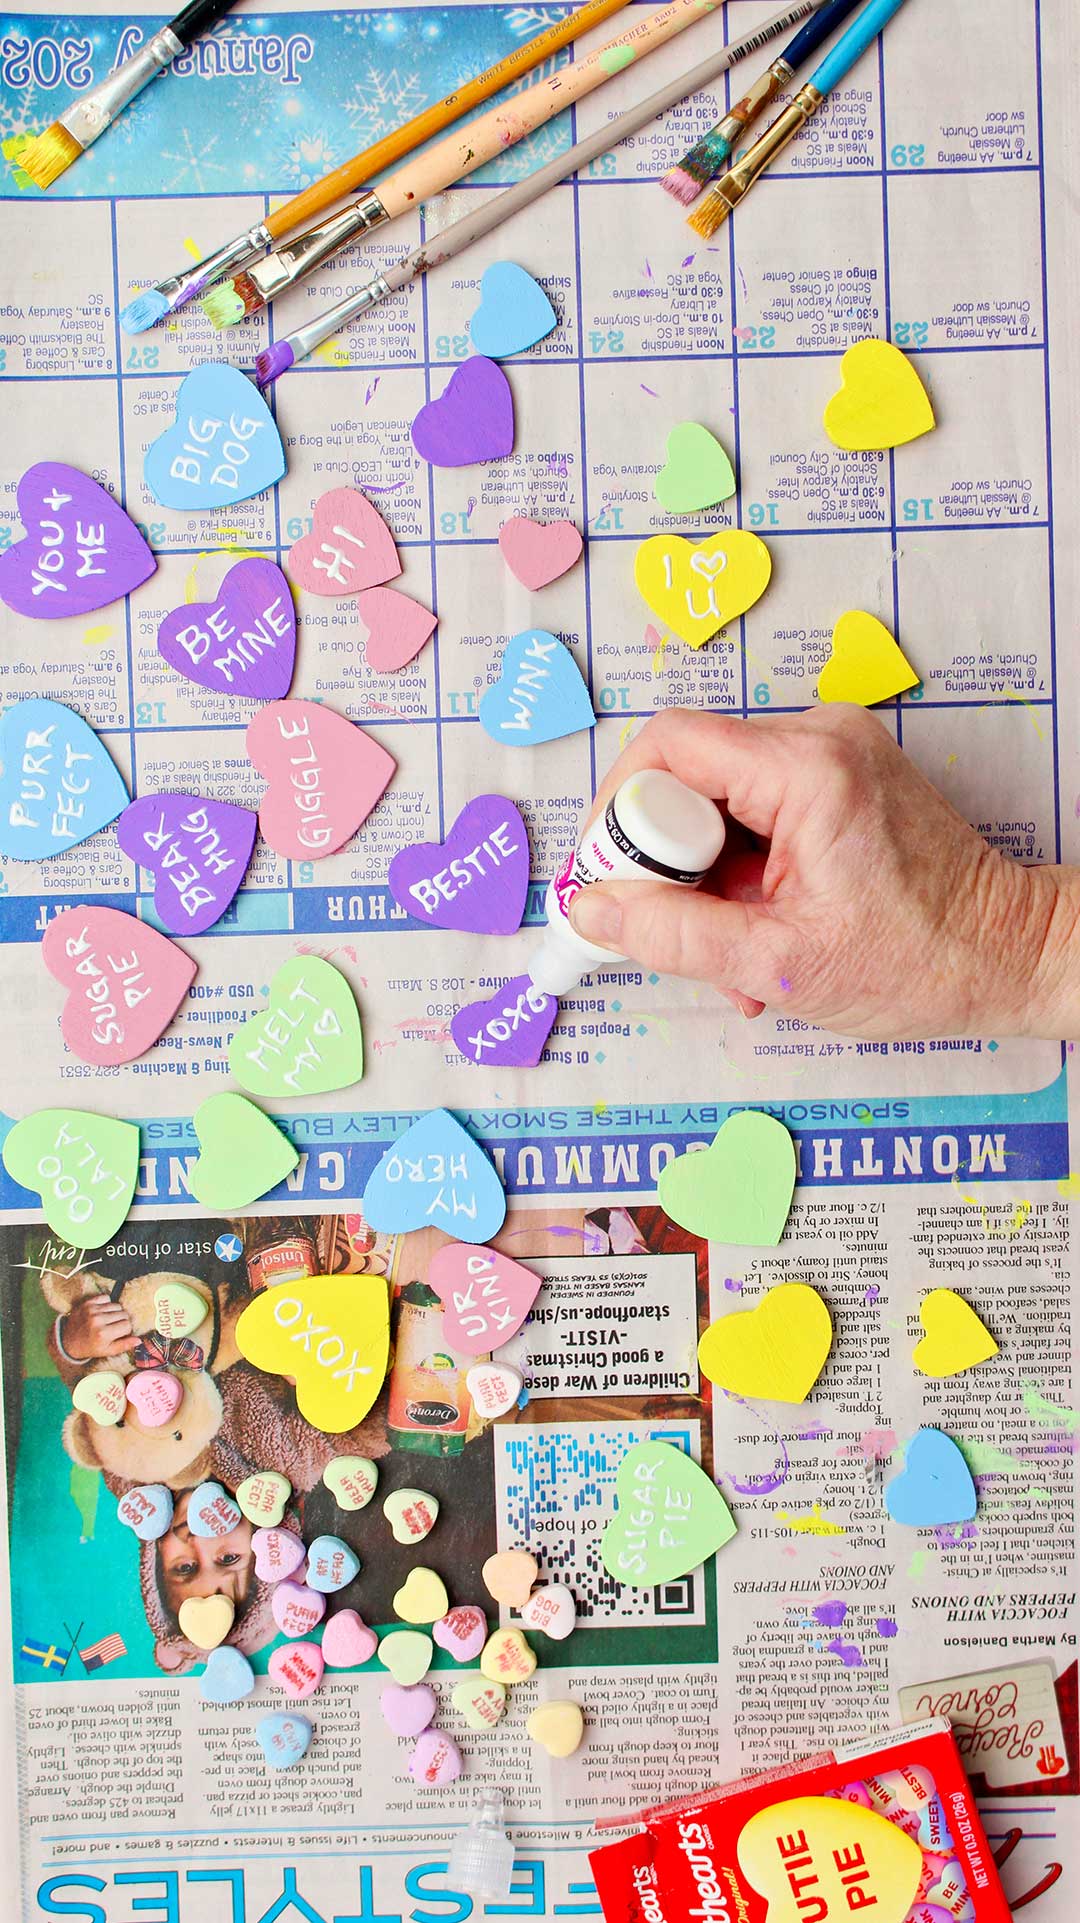 Hand using white puff paint to write messages on wooden conversation hearts.